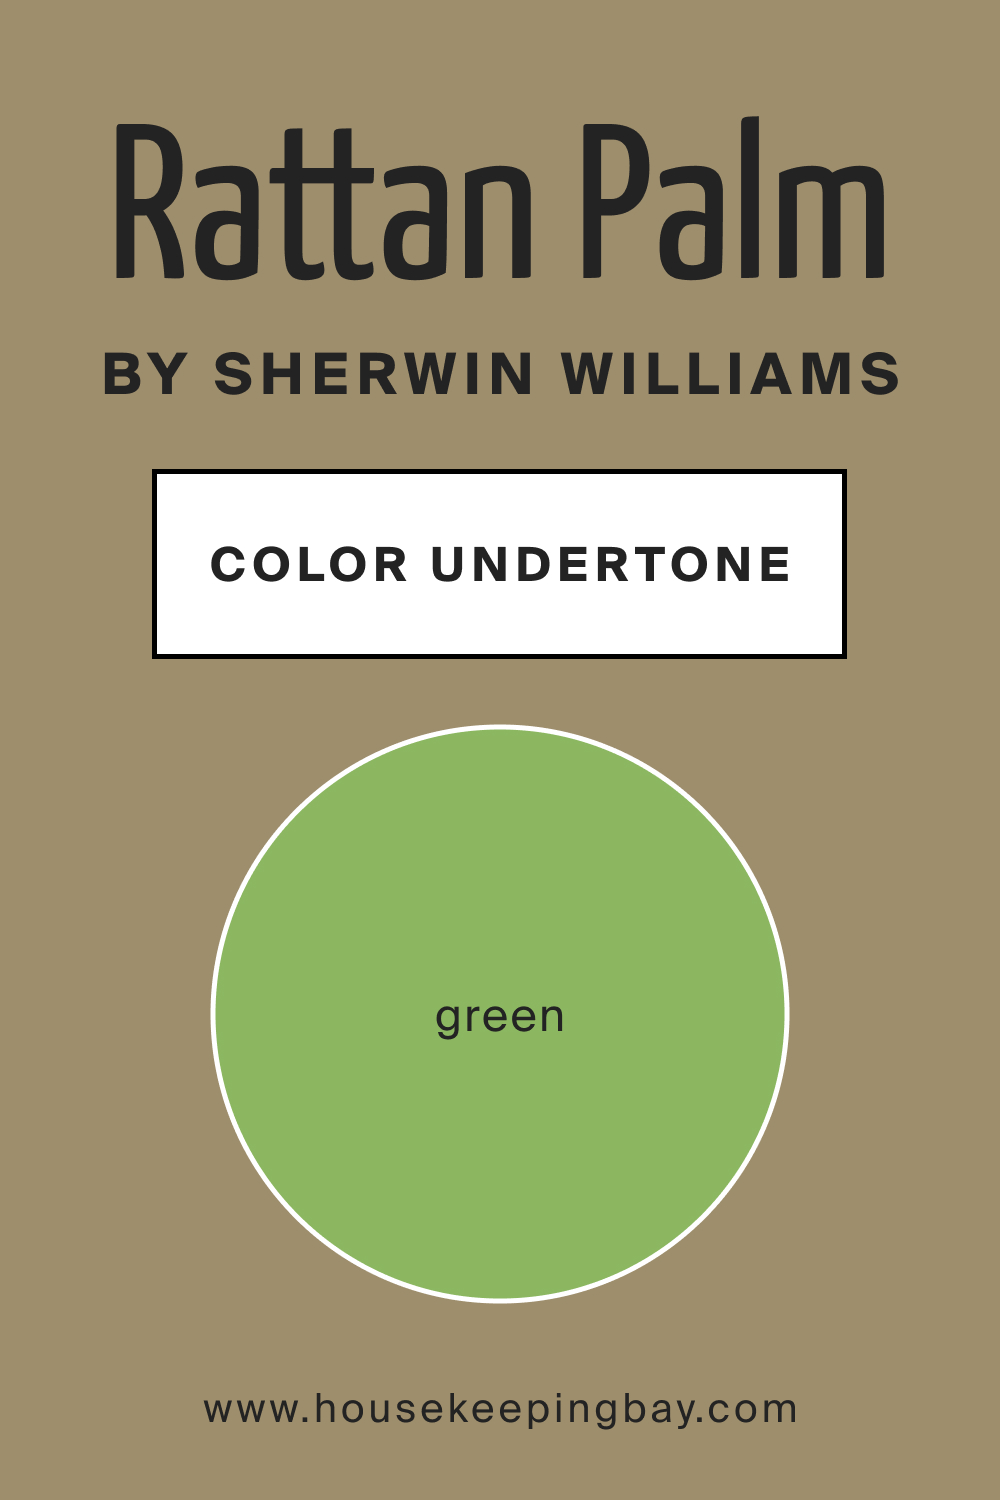 SW 9533 Rattan Palm by Sherwin Williams Color Undertone